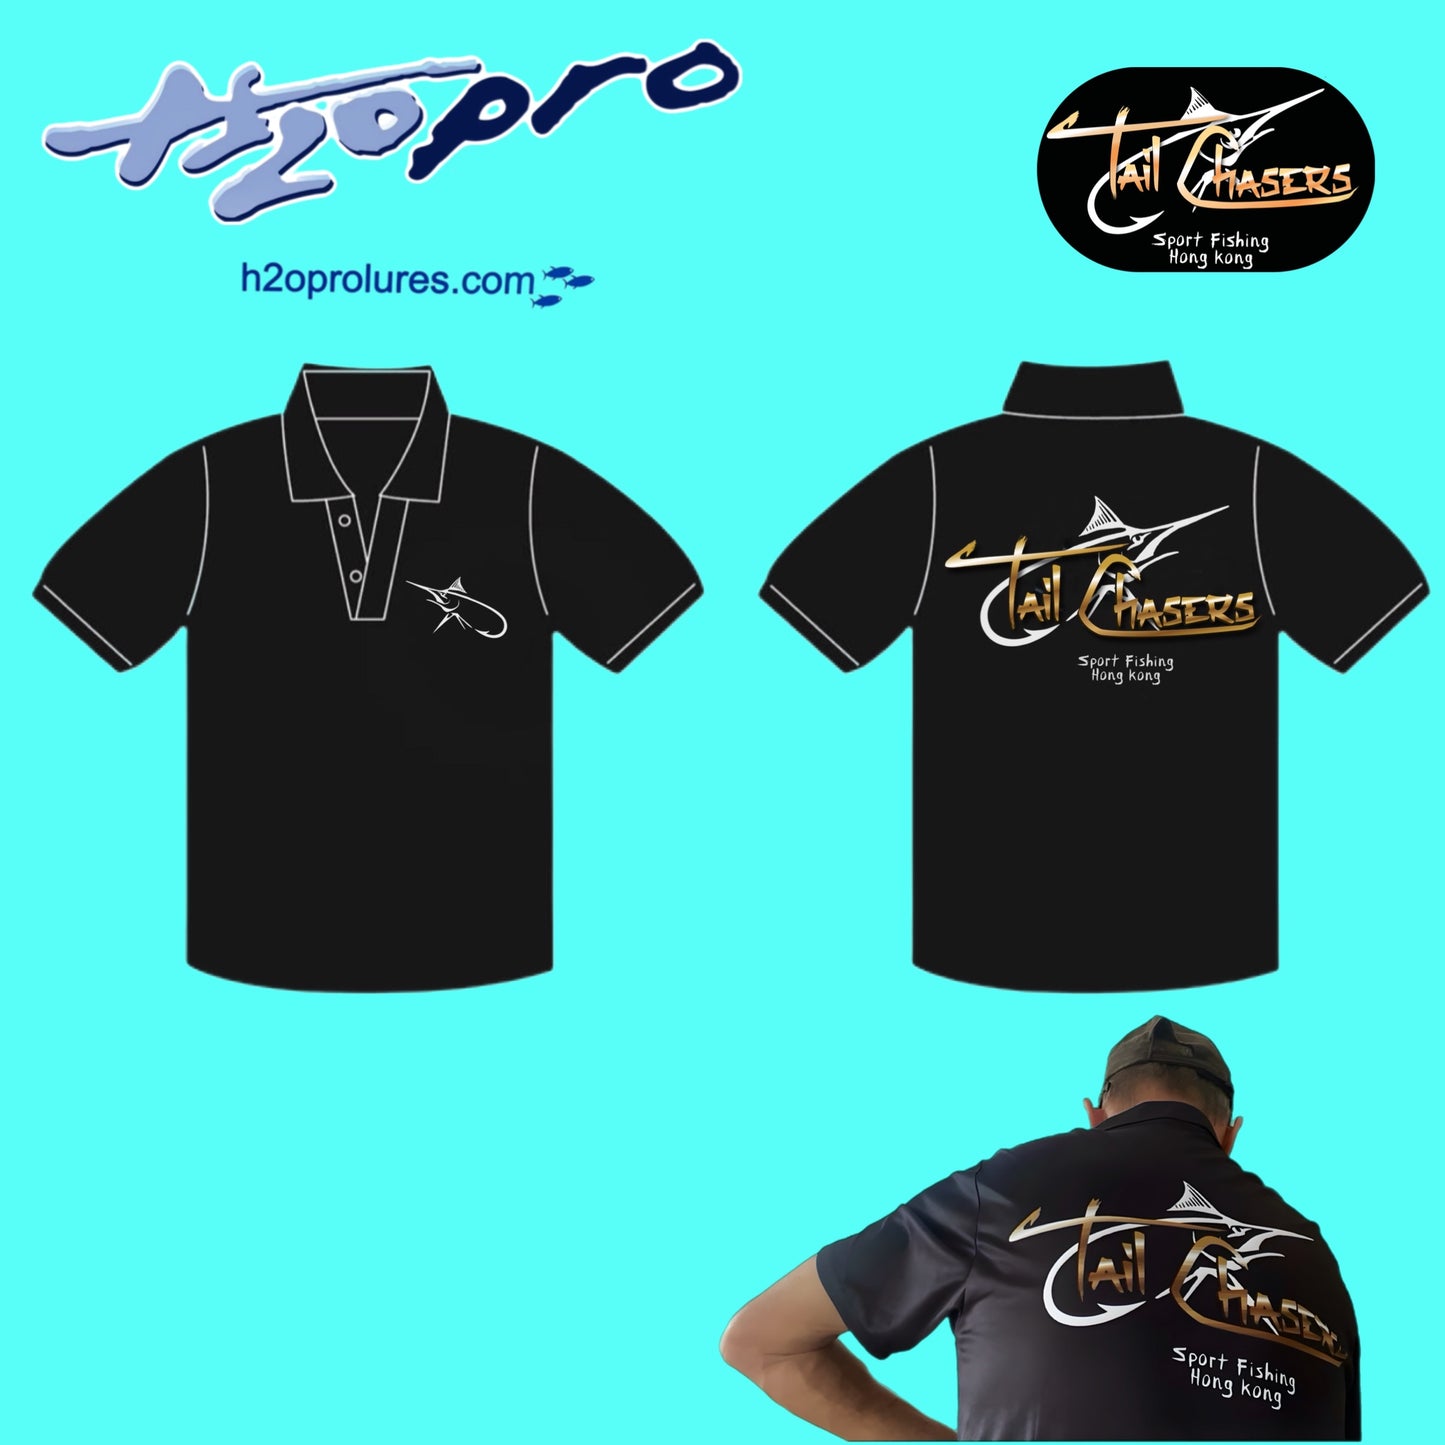 Tailchasers polo shirts   NEW Logo